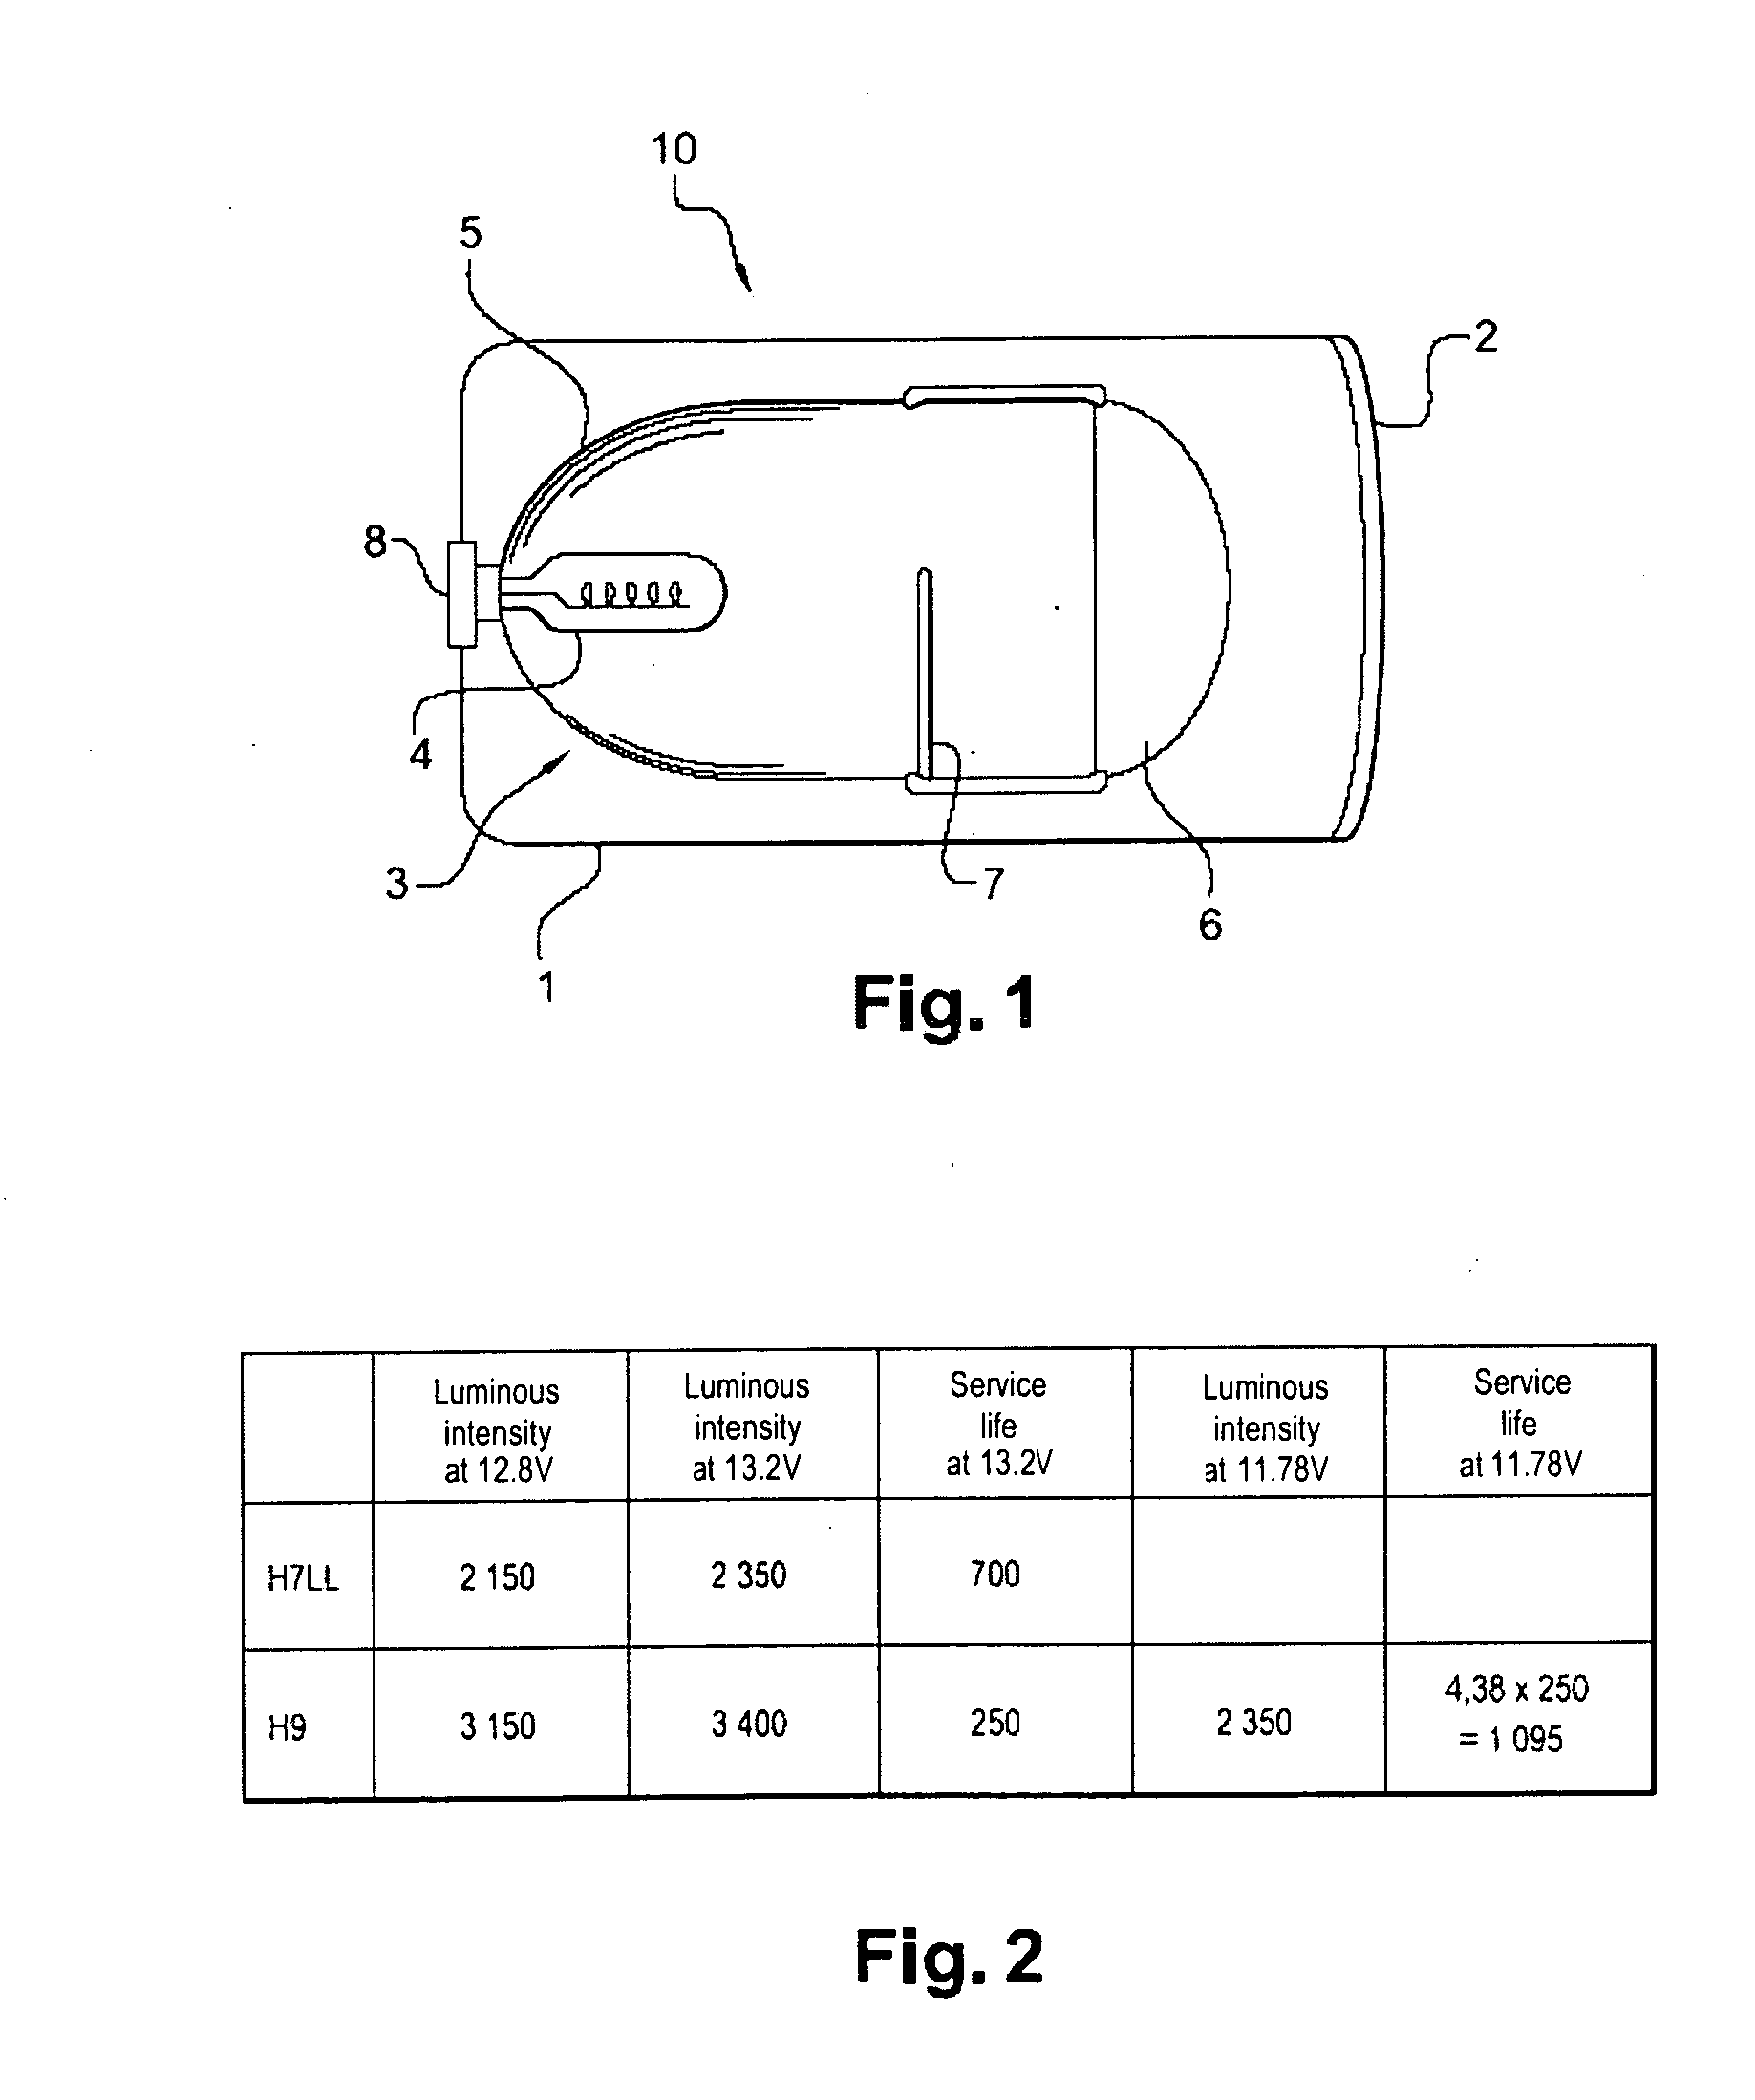 Method of supplying power to an automobile headlight lamp and headlight using that method